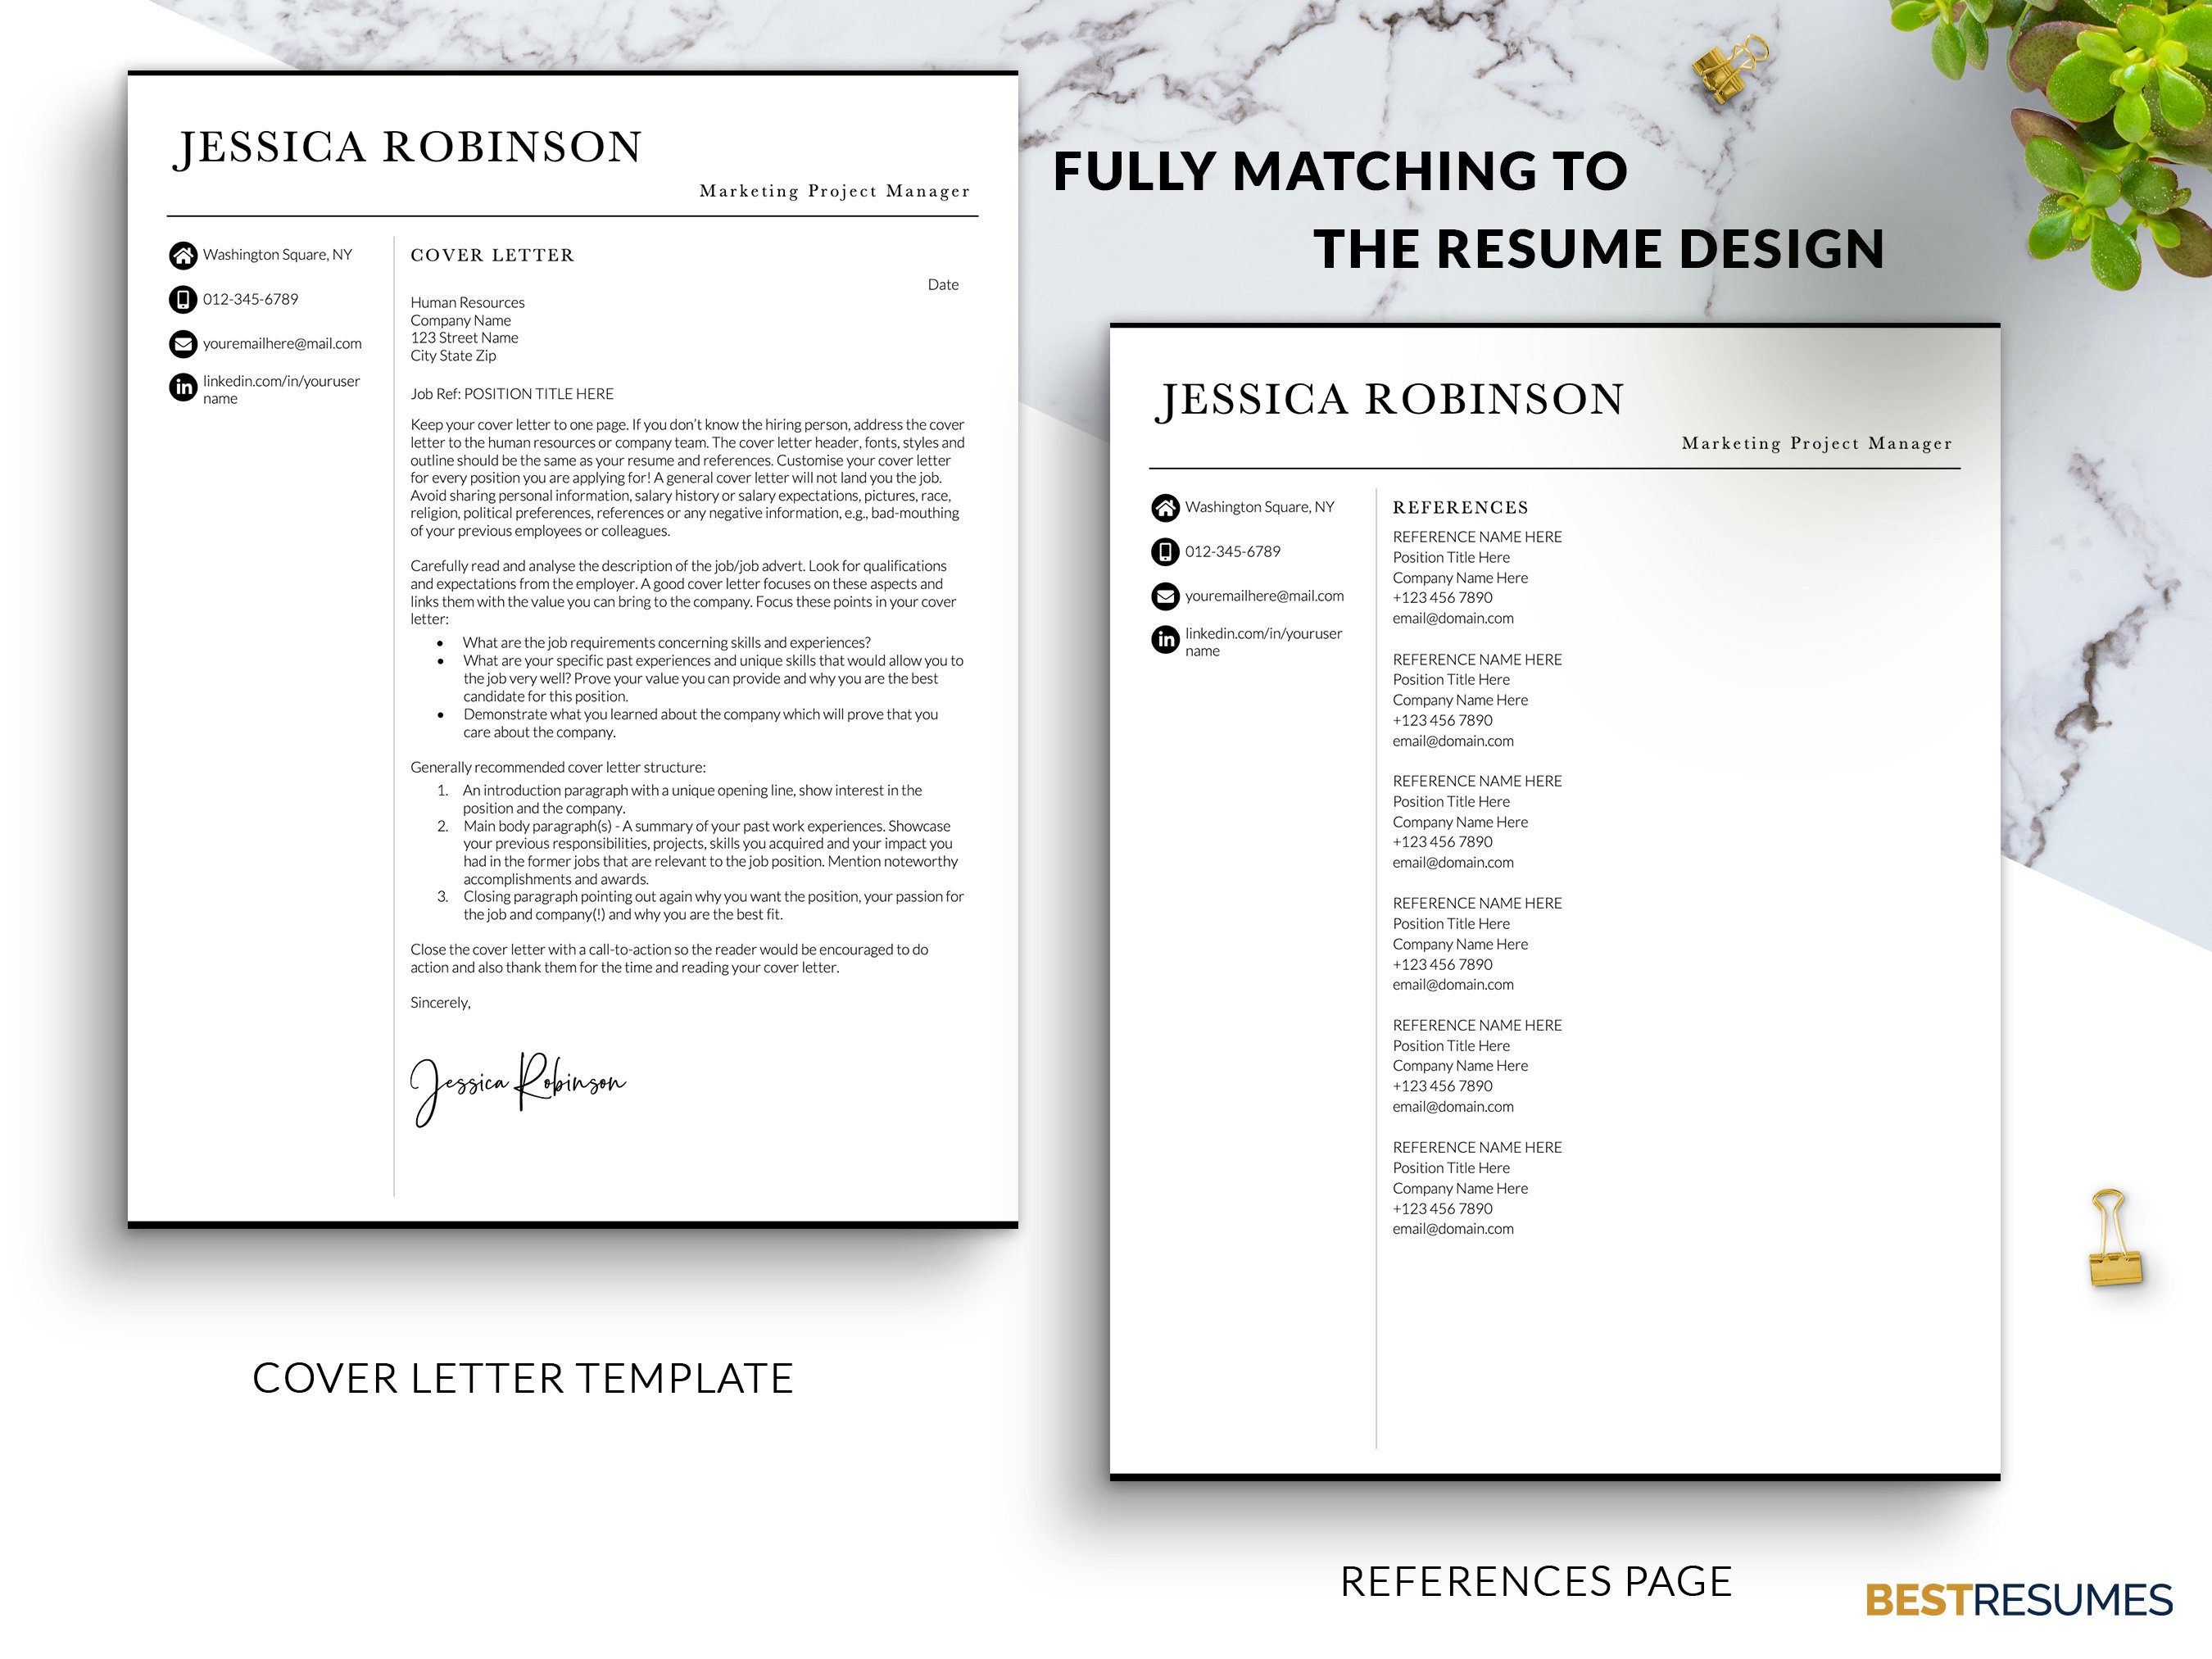 marketing project manager cv resume template cover letter references jessica robinson 529